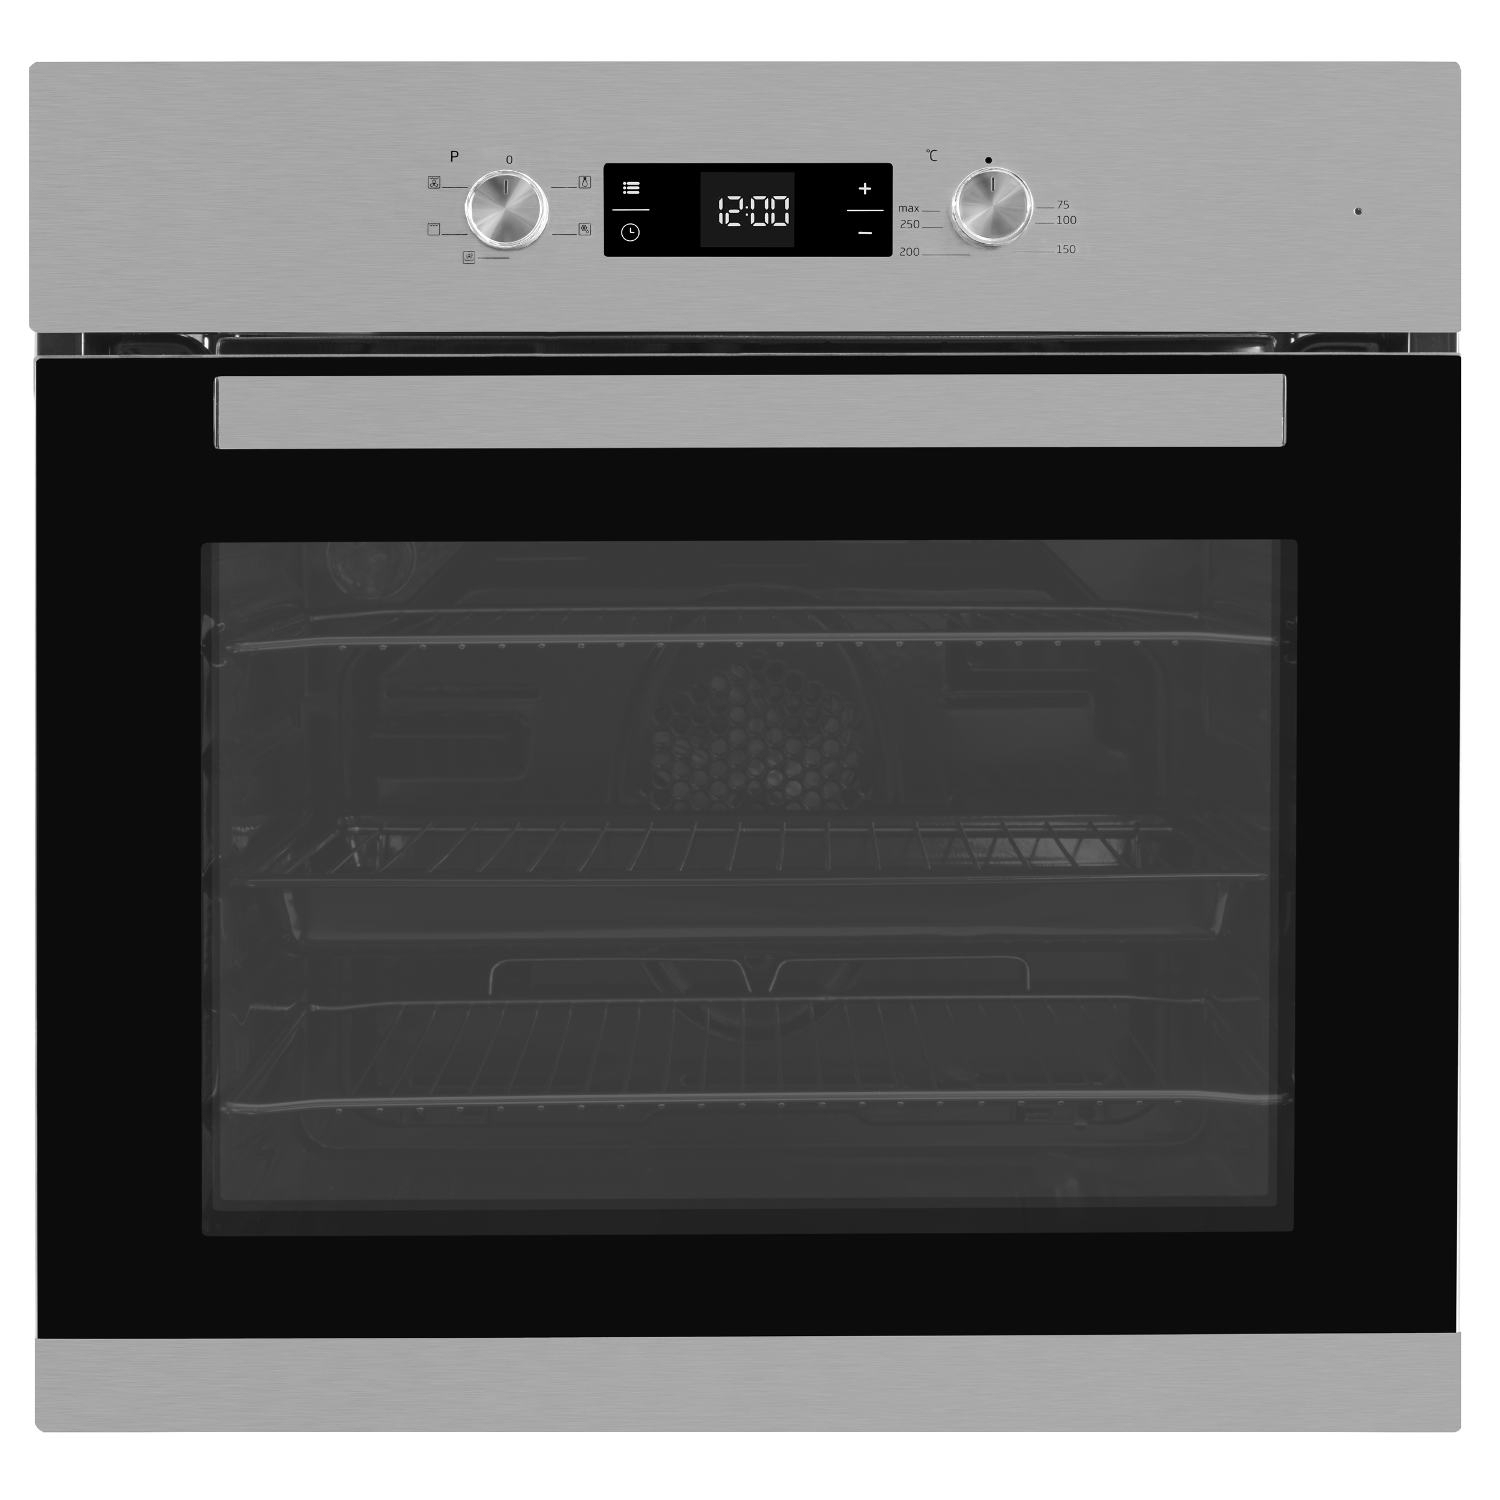 Beko Built In Electric Programmable Single Oven - Stainless Steel - A Rated - 0